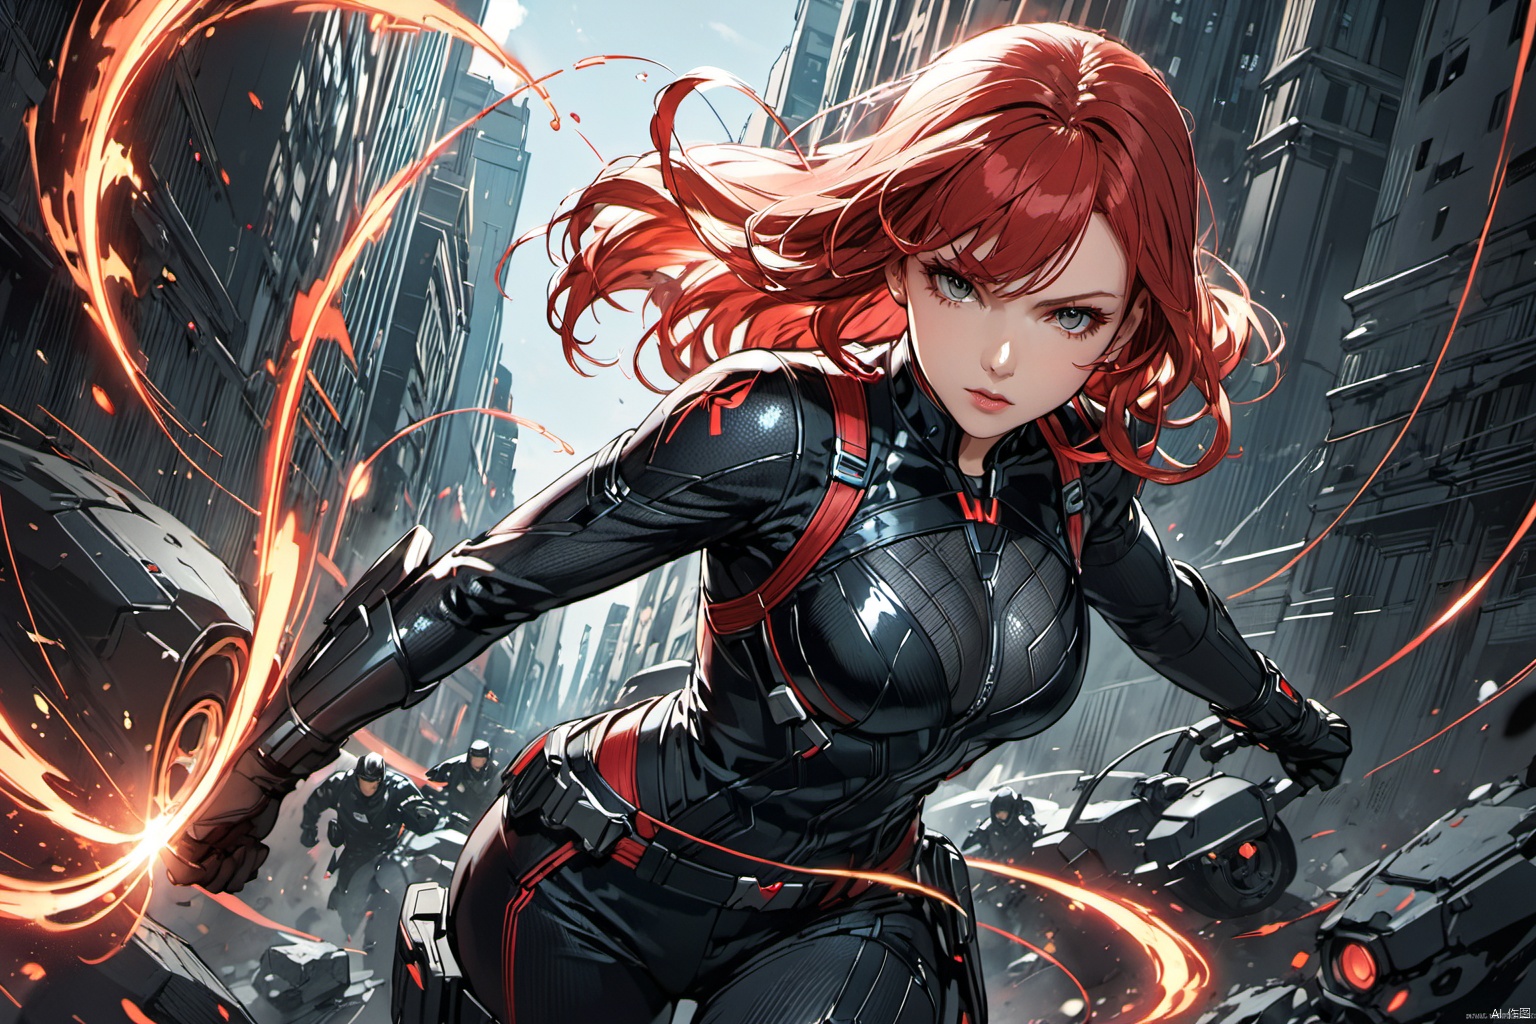  ultra-detailed,(best quality),((masterpiece)),(highres),original,extremely detailed 8K wallpaper,(an extremely delicate and beautiful),anime, (close up ,  solo:1.3), 

A dynamic illustration of Marvel's heroine Black Widow, clad in her sleek combat suit, exuding a focused and resolute demeanor. Her movements are powerful yet graceful, as if poised for imminent combat. The background is predominantly dark, accentuating her silhouette. Vibrant details such as her red hair and metallic gear add dynamism and tension to the scene. The overall composition is balanced and dramatic, evoking a sense of Black Widow's bravery and determination. This illustration is sure to resonate strongly with viewers, showcasing the unique charm of this member of the Avengers.